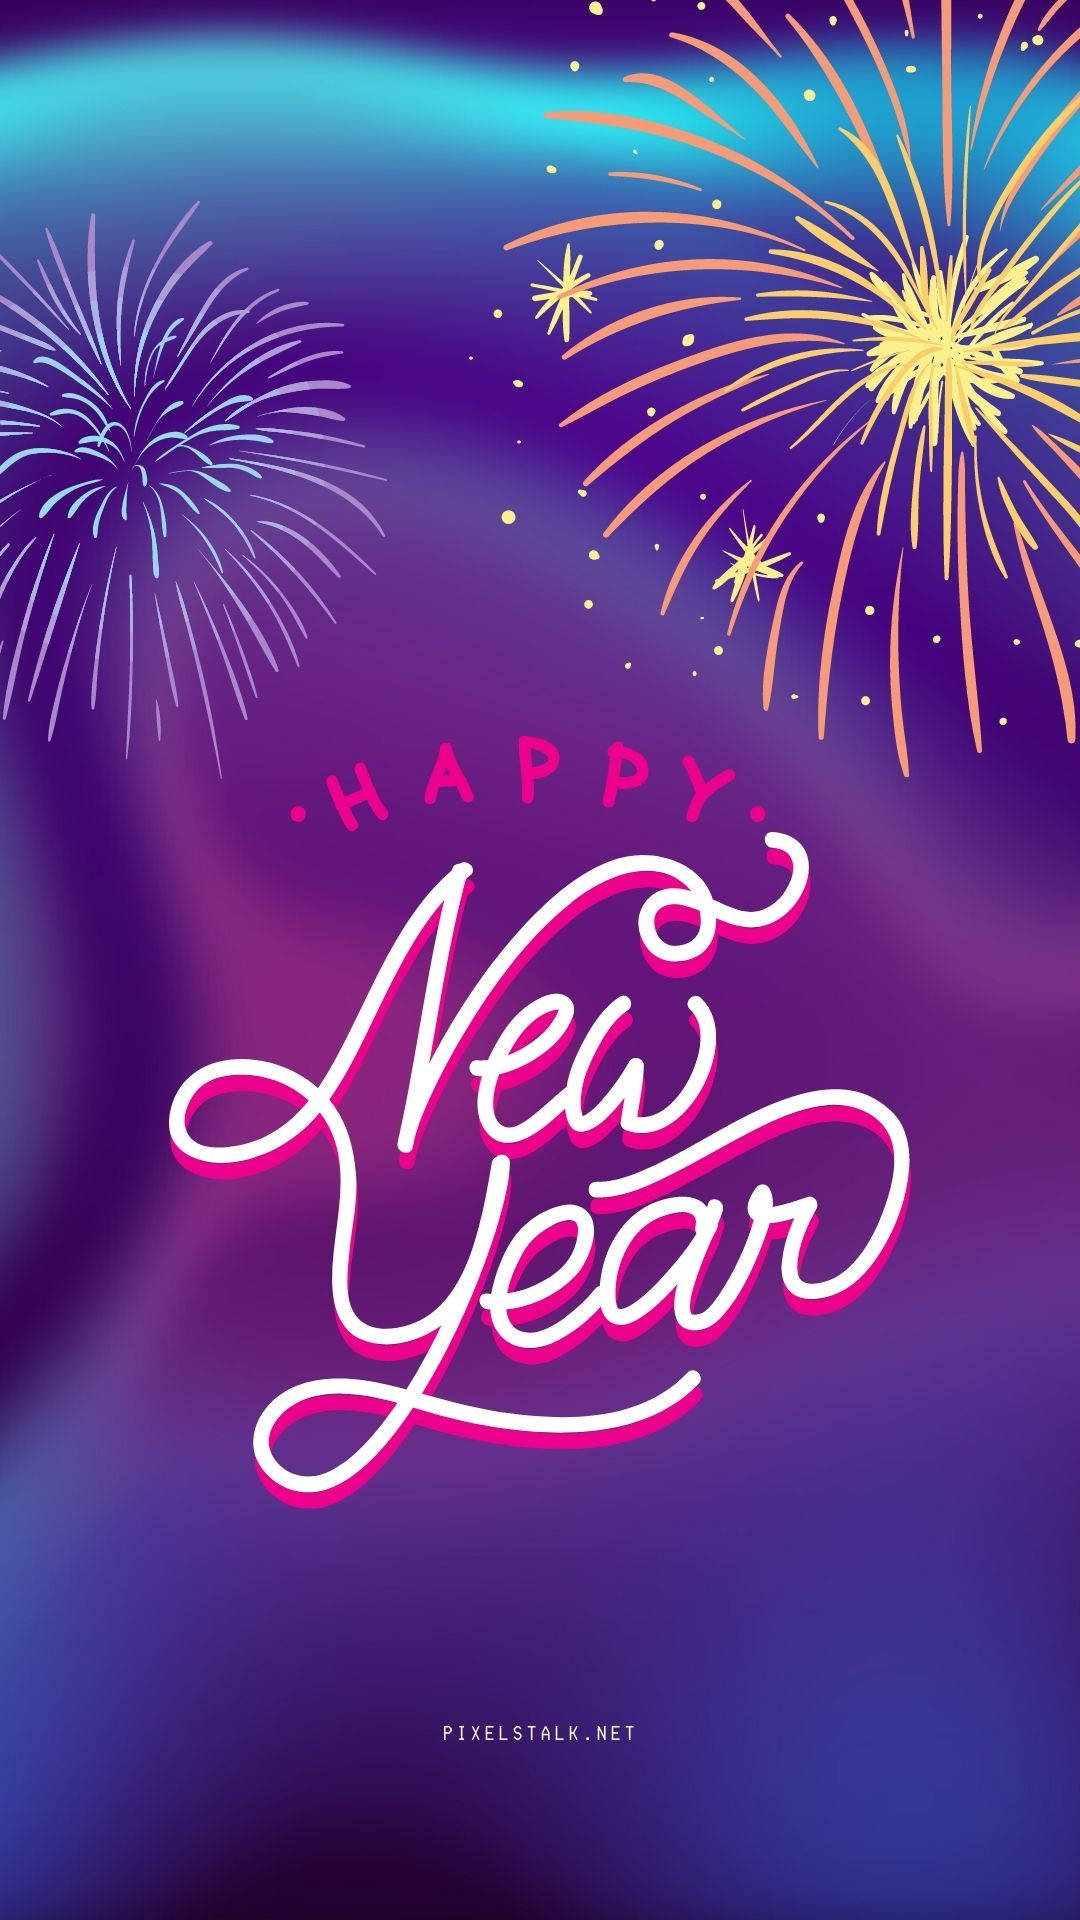 New Year Greetings On Purple Background Background